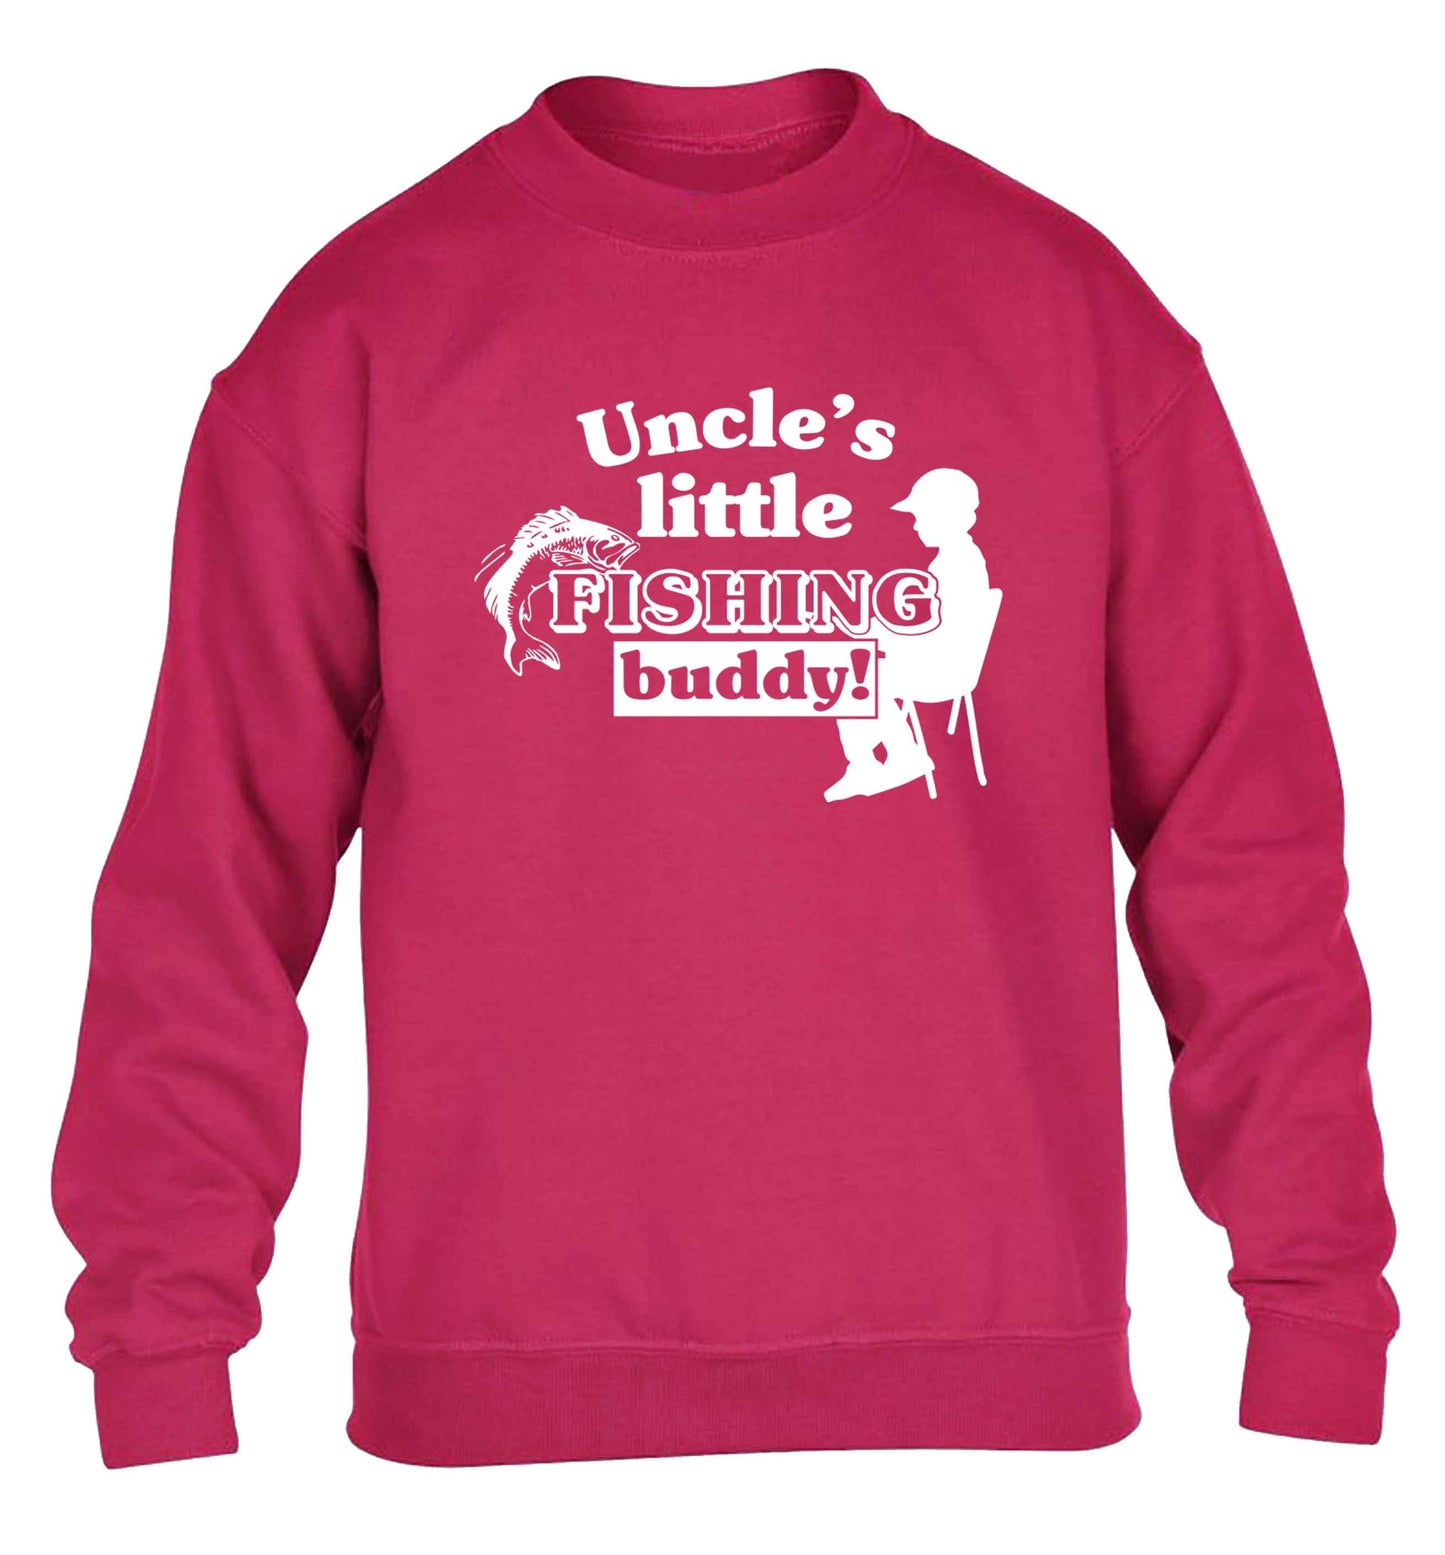 Uncle's little fishing buddy children's pink sweater 12-13 Years